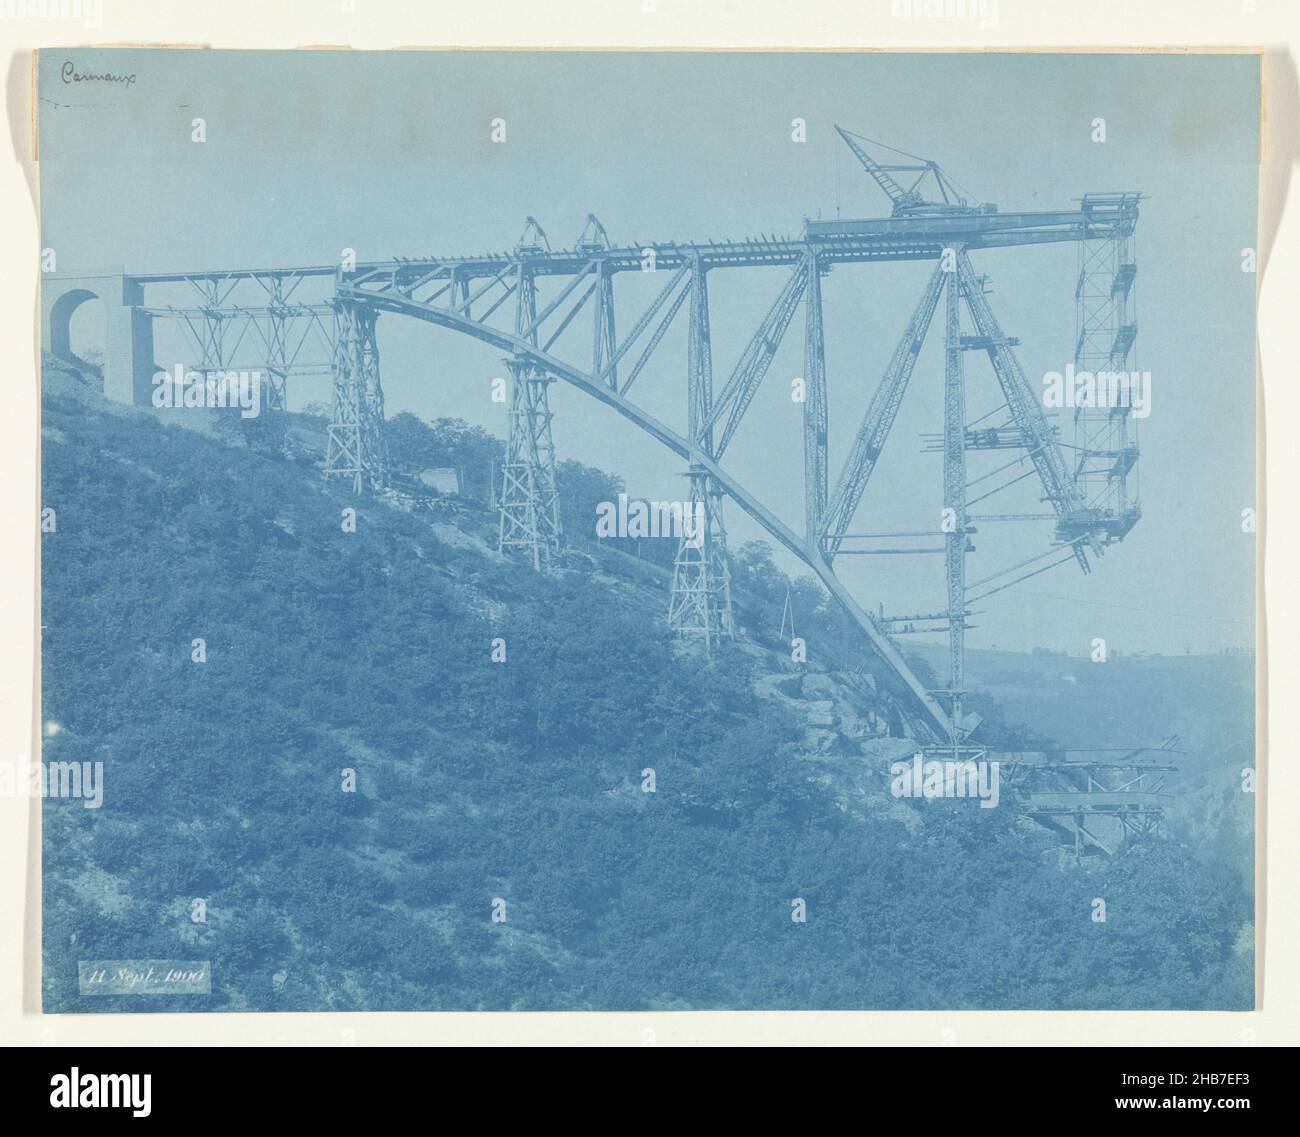 Construction of the Viaur Viaduct in France by the Societé de Construction des Battignolles, September 11, 1900, anonymous, France, 11-Sep-1900, photographic support, cyanotype, height 224 mm × width 285 mm Stock Photo